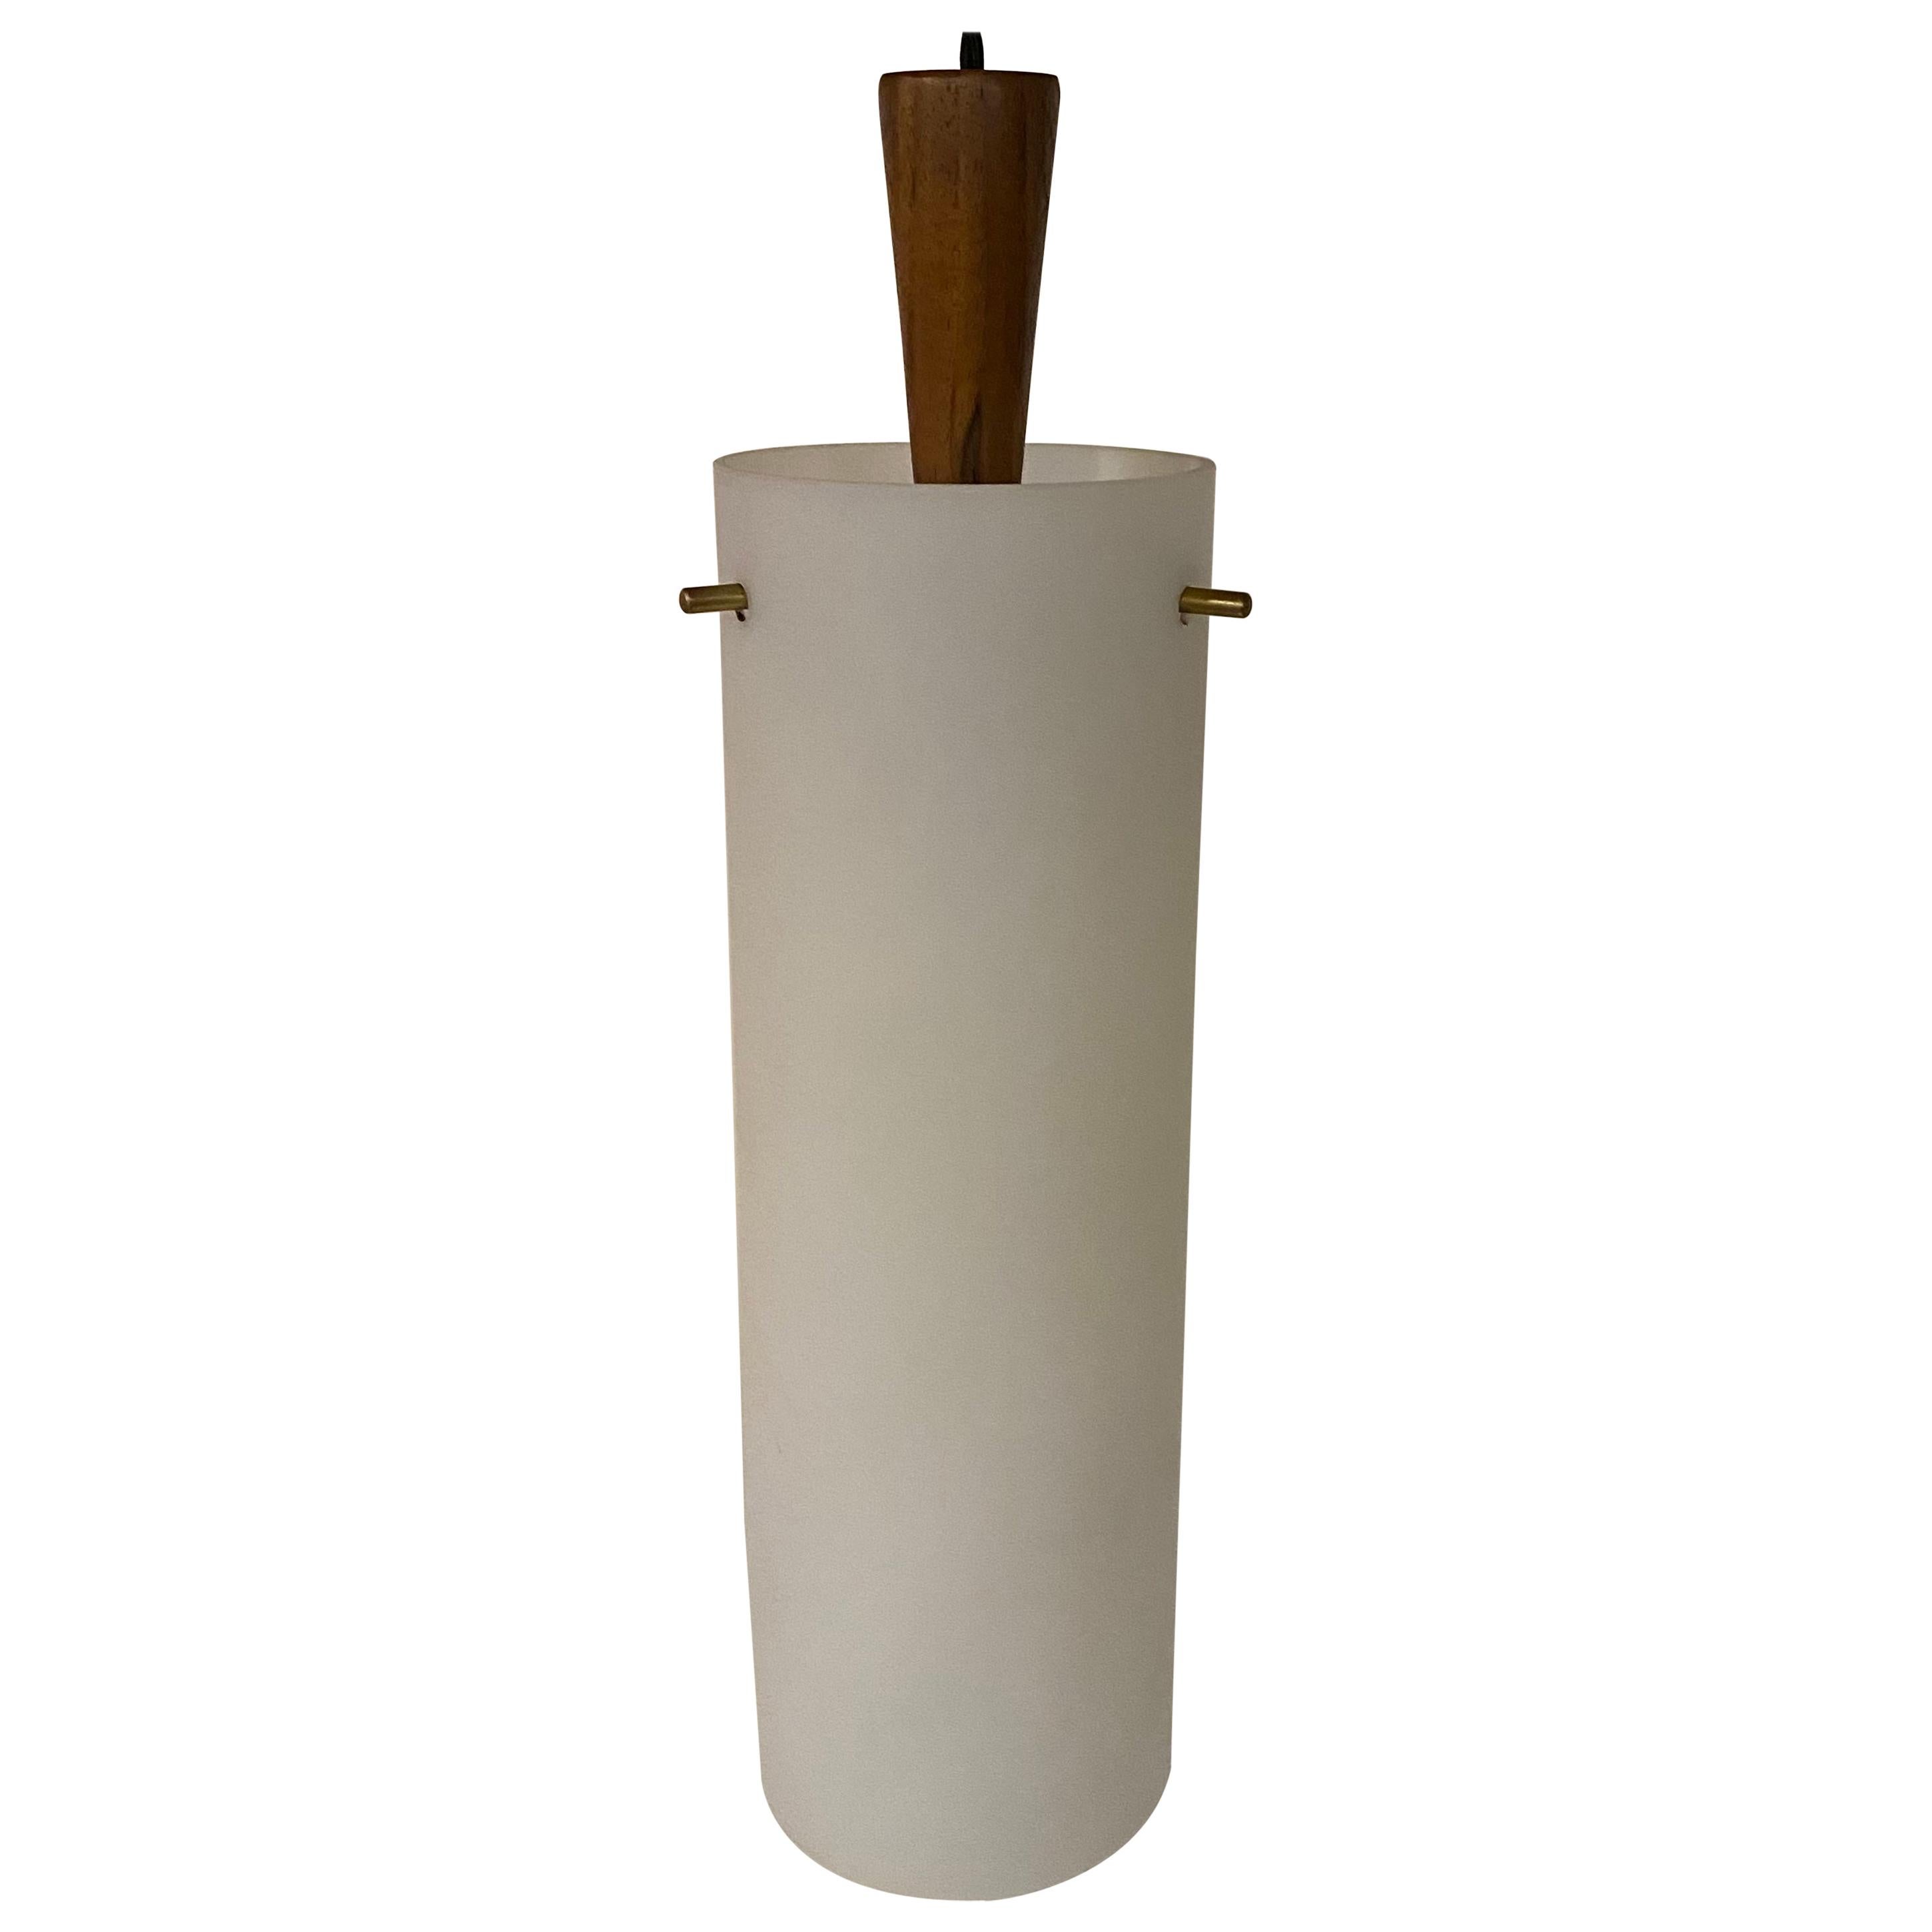 Hadeland Frosted Glass, Brass and Wood Pendant Light Fixture